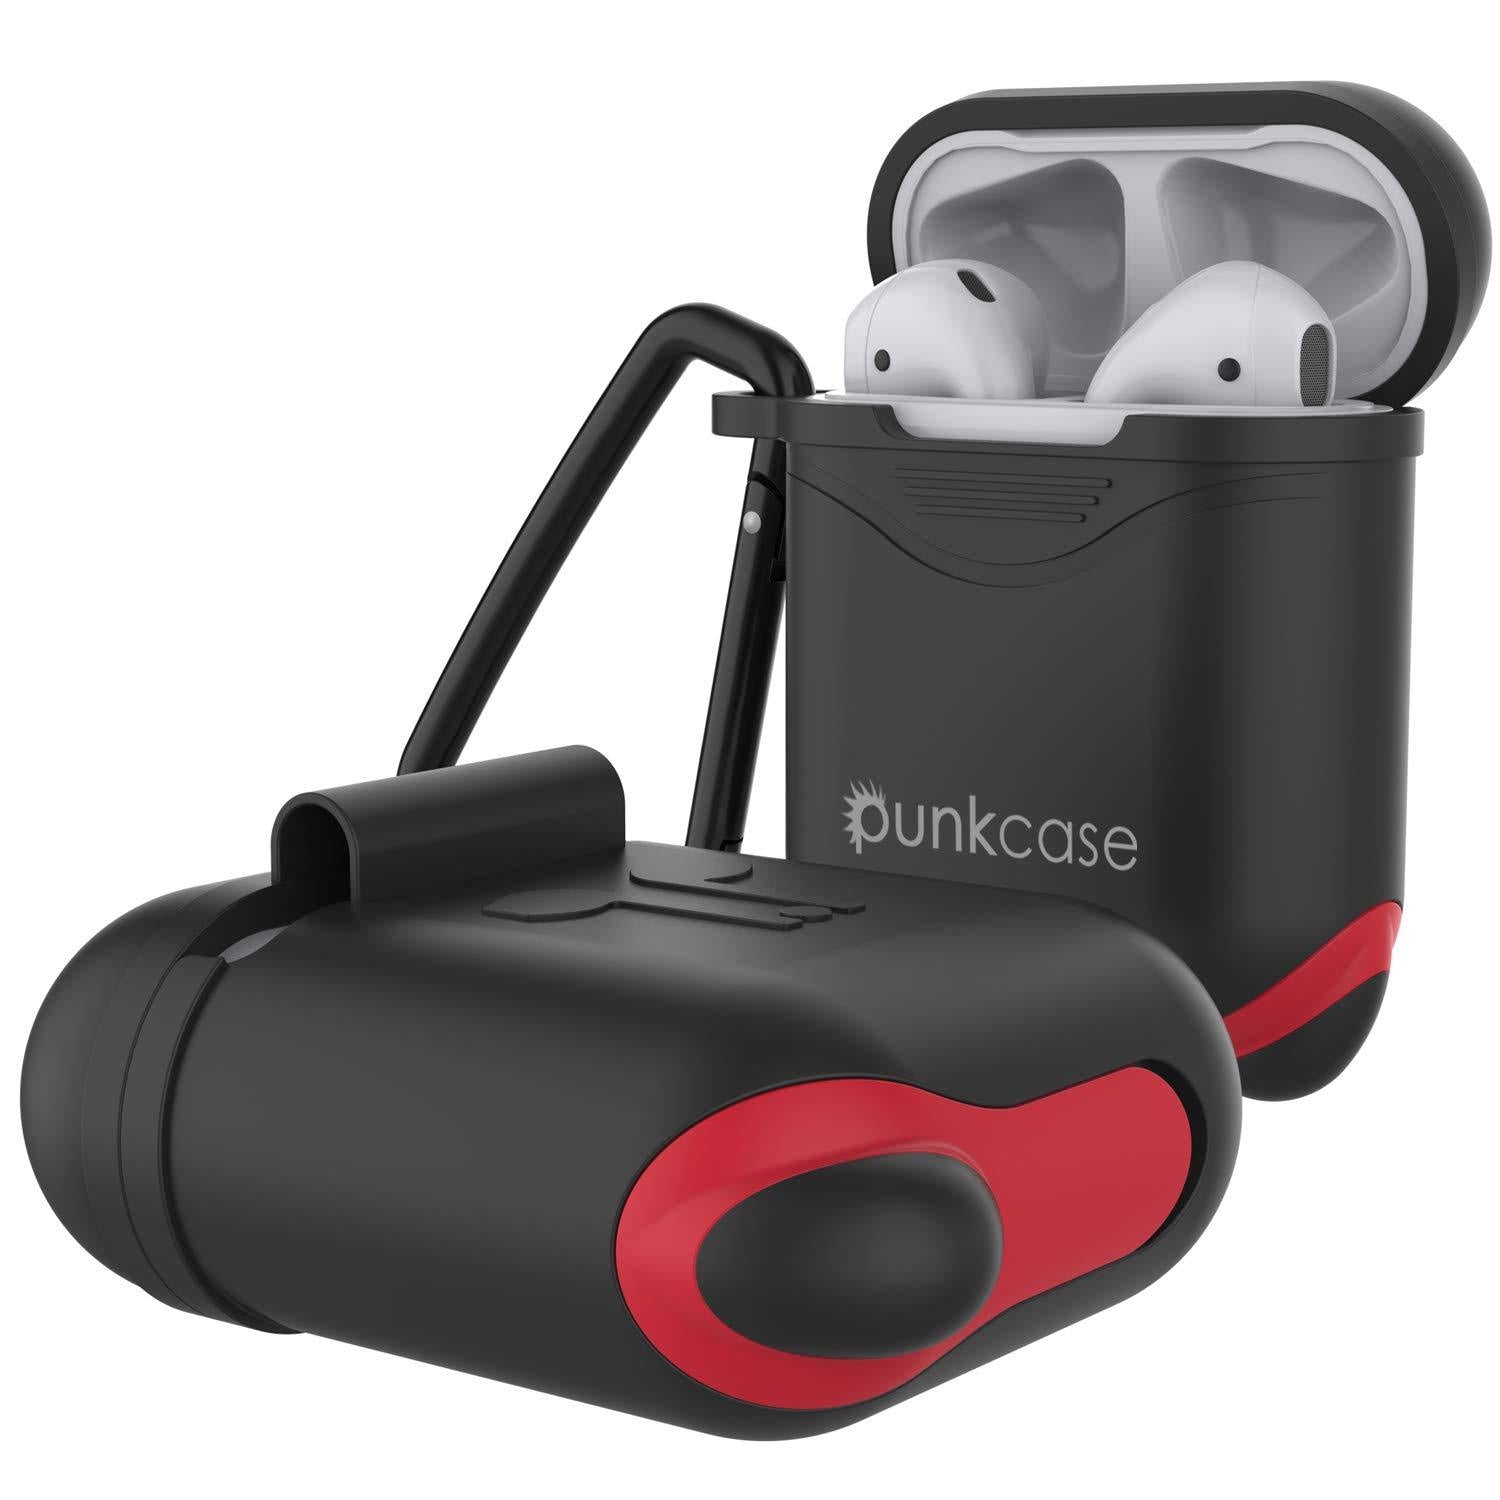 Punkcase Airpod Case with Keychain (Black)